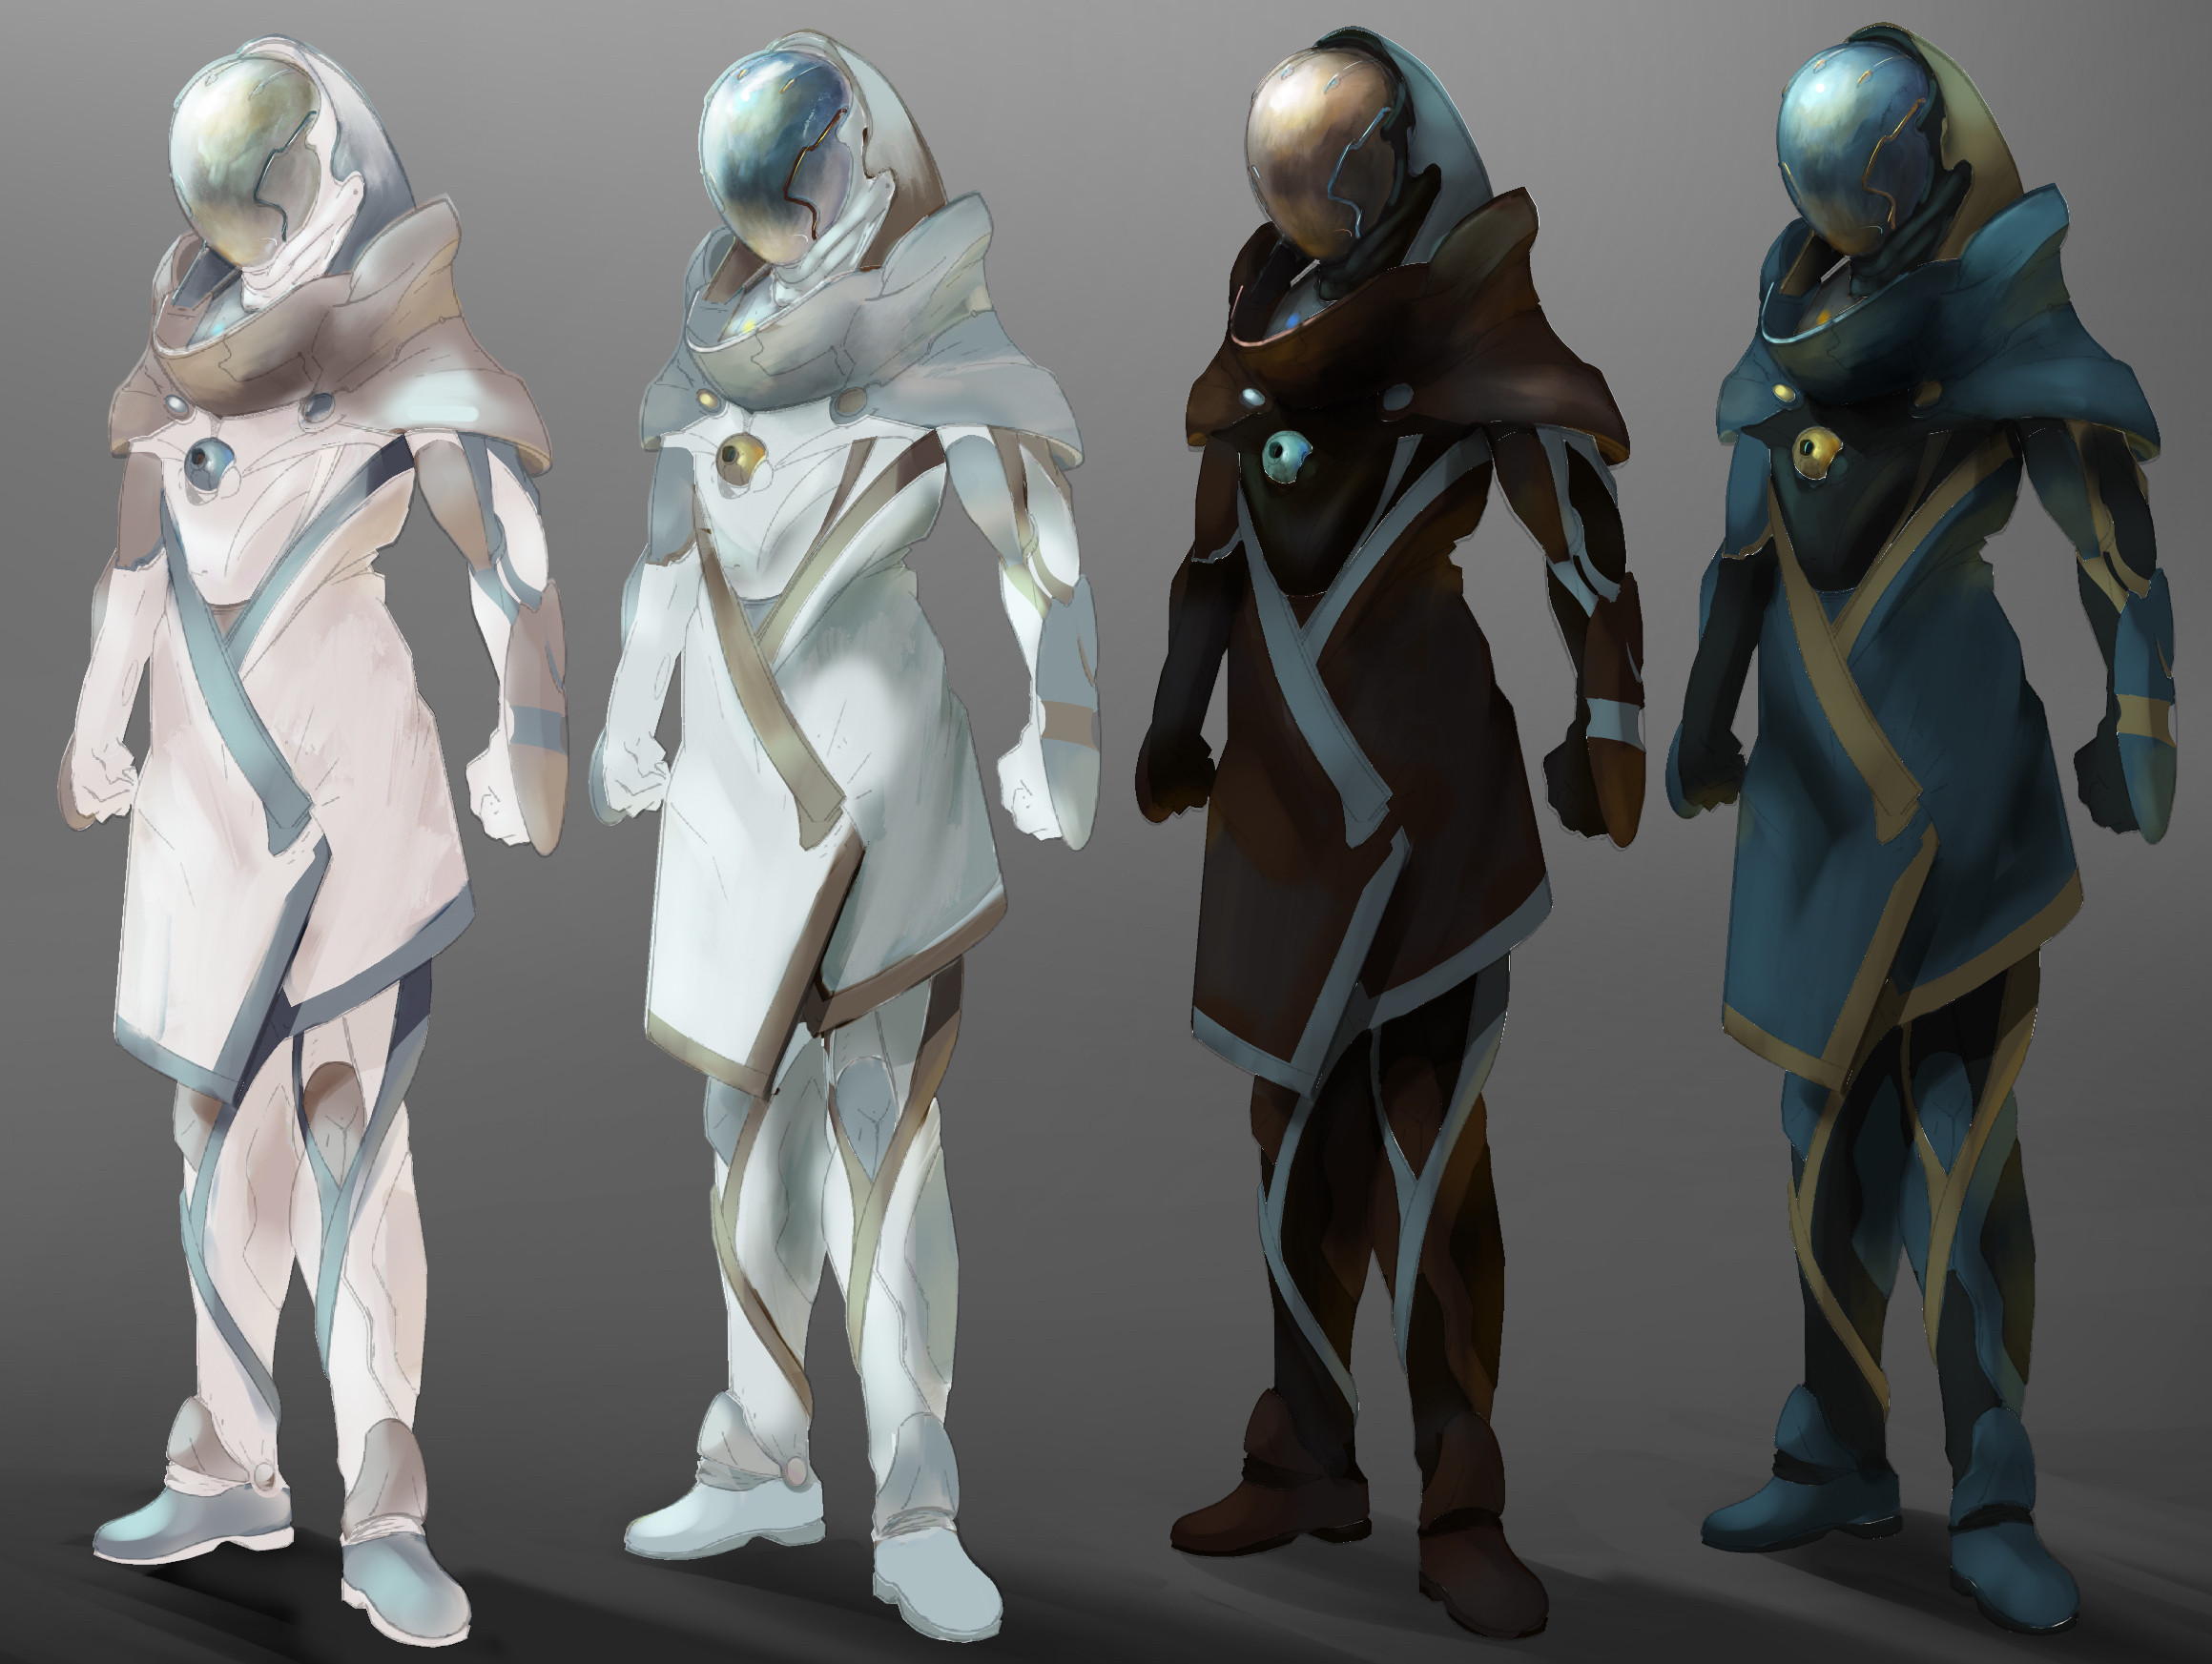 Maylon Officer Armor and Color scheme study.